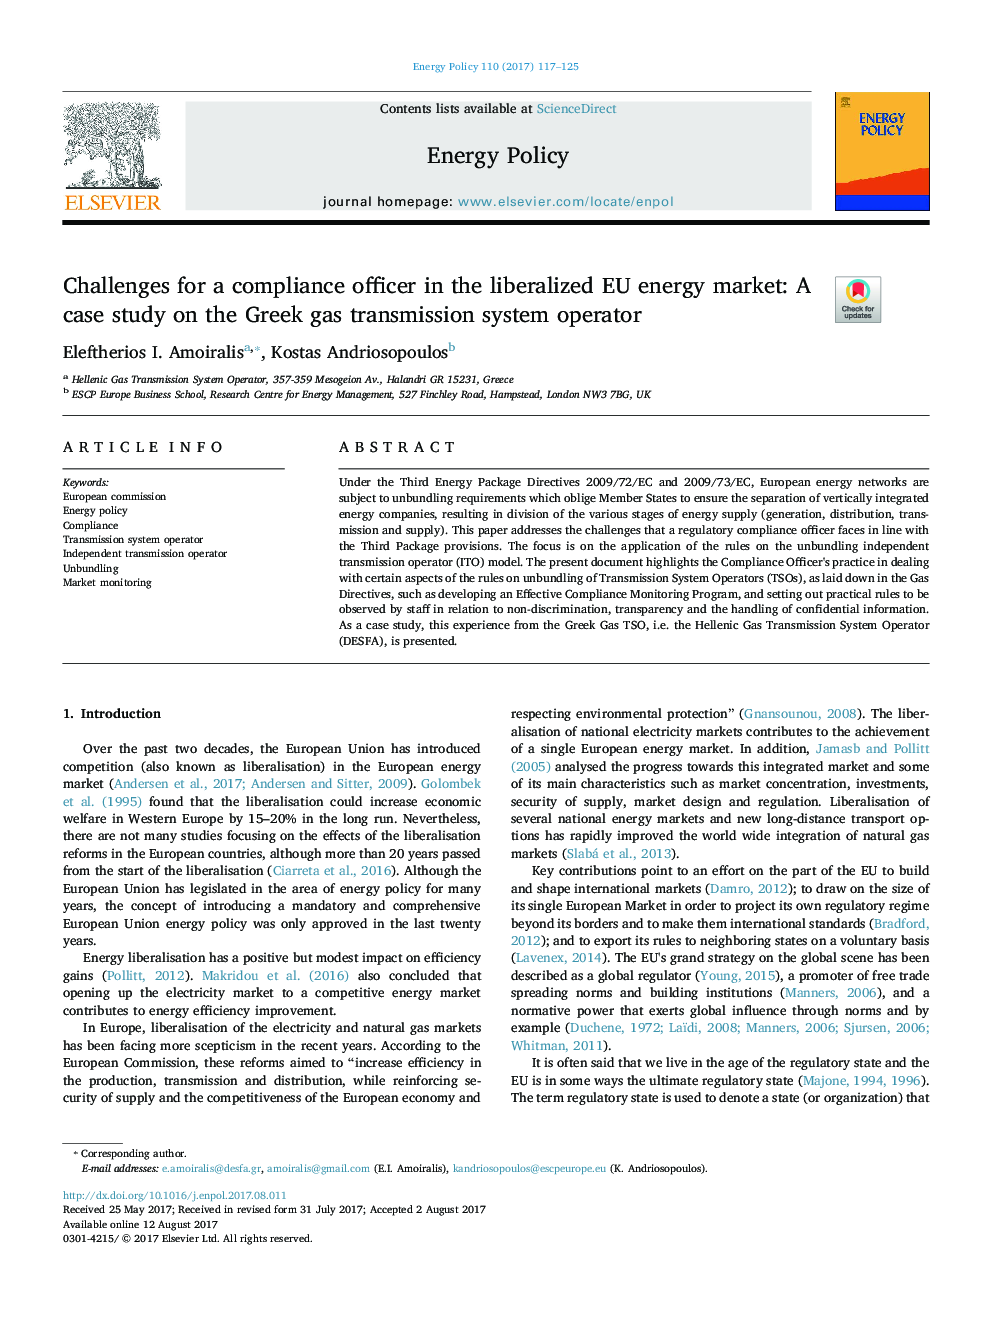 Challenges for a compliance officer in the liberalized EU energy market: A case study on the Greek gas transmission system operator